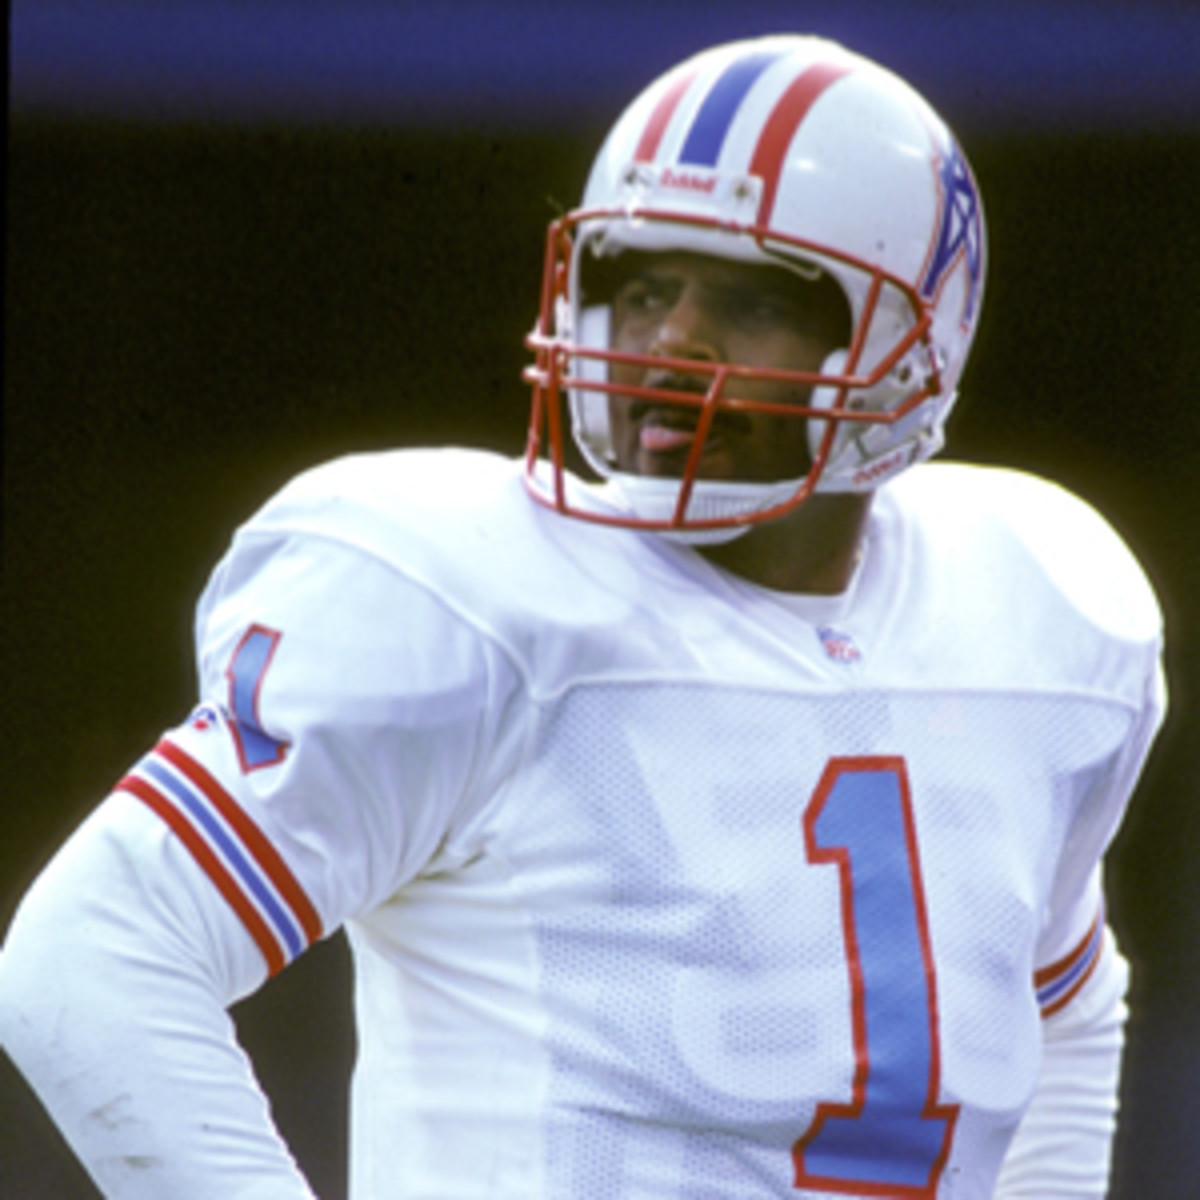 Hall of Famer Warren Moon spent six years in CFL before getting a chance to quarterback in NFL. (Mitchell Layton/Getty Images)